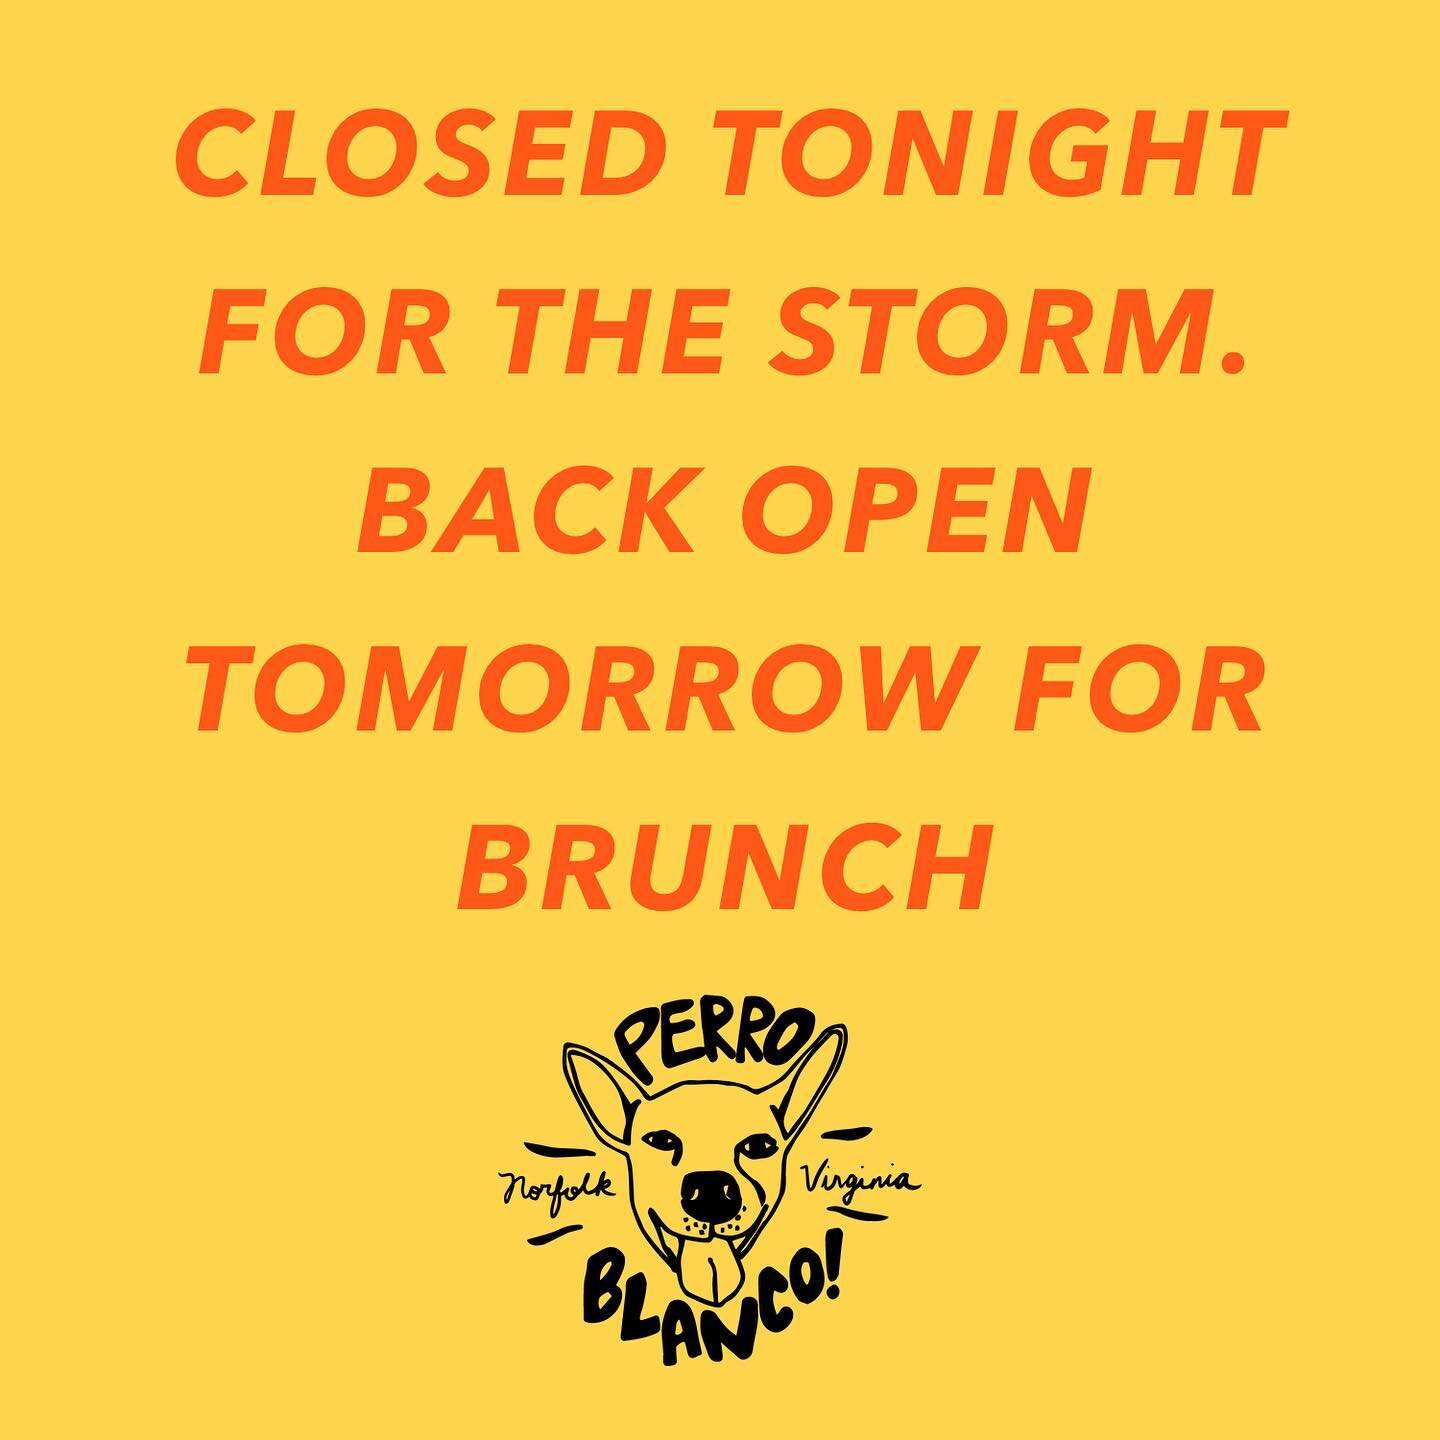 Closing at 3pm today (Friday) due to the storm. Back open tomorrow at 10am for everyone&rsquo;s favorite breakfast tacos. 🌶 

Stay safe out there, tomorrow is looking muy bueno.